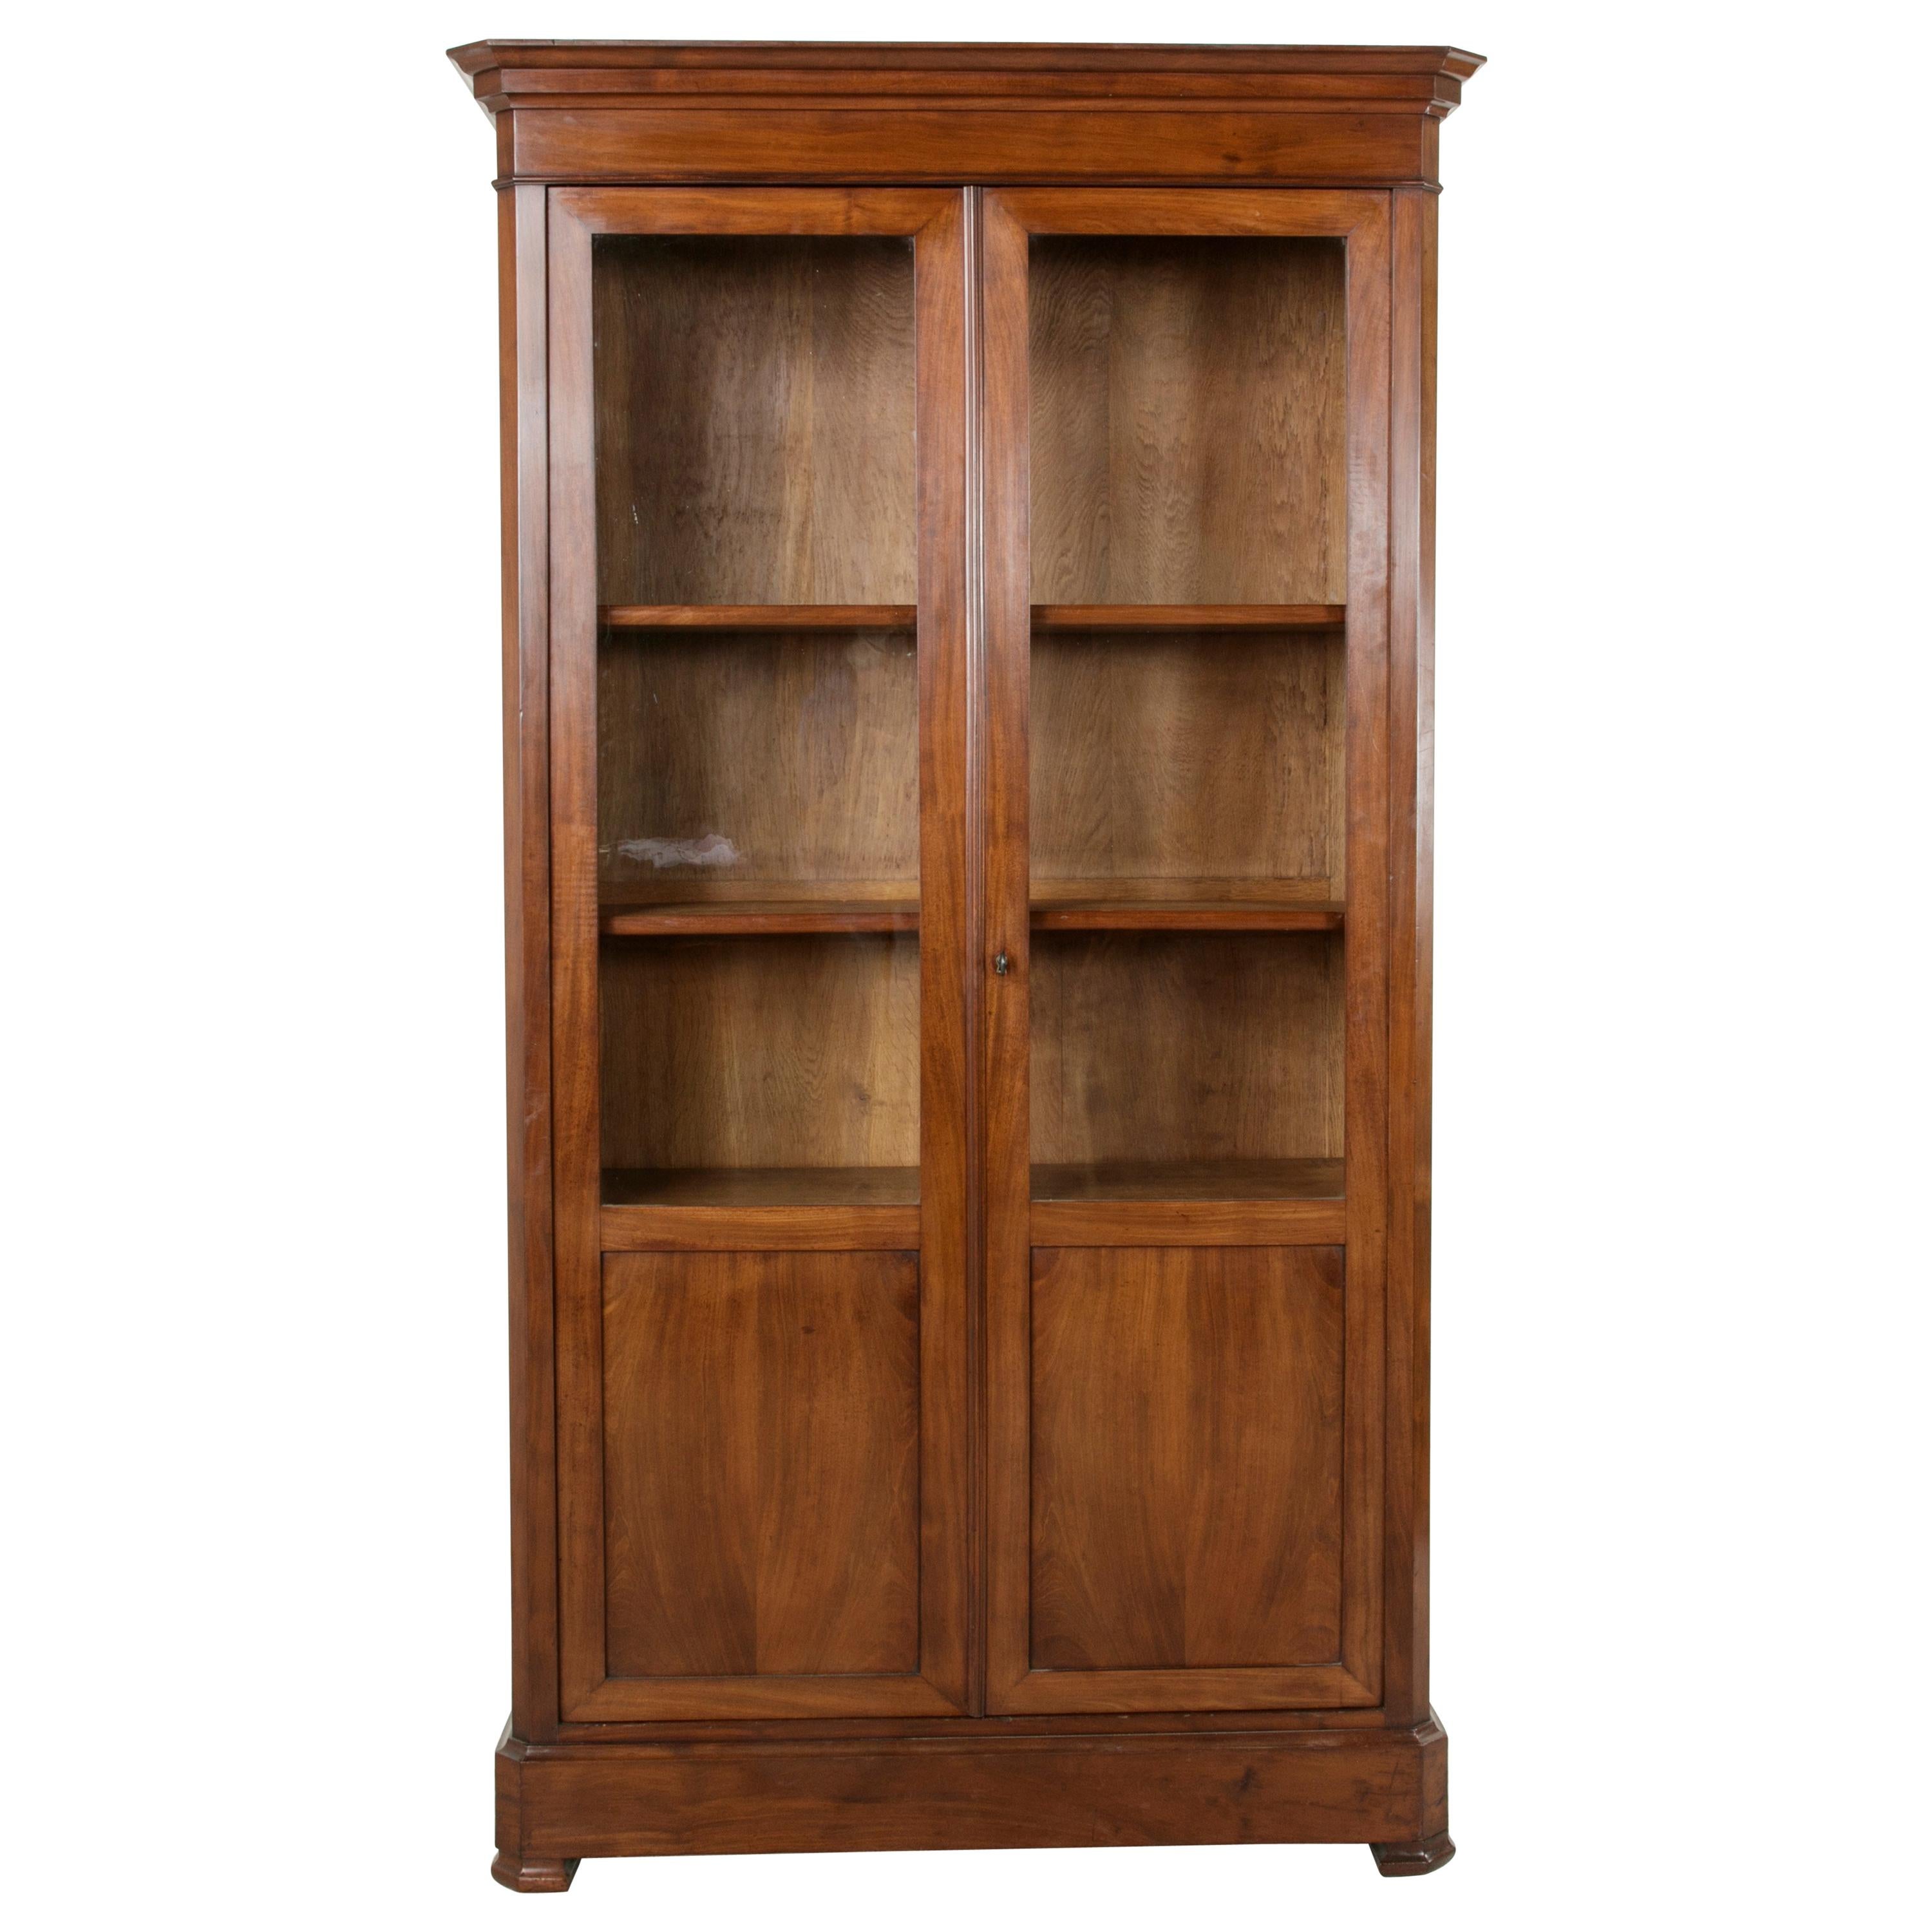 Mid-19th Century French Louis Philippe Period Mahogany Bookcase or Vitrine